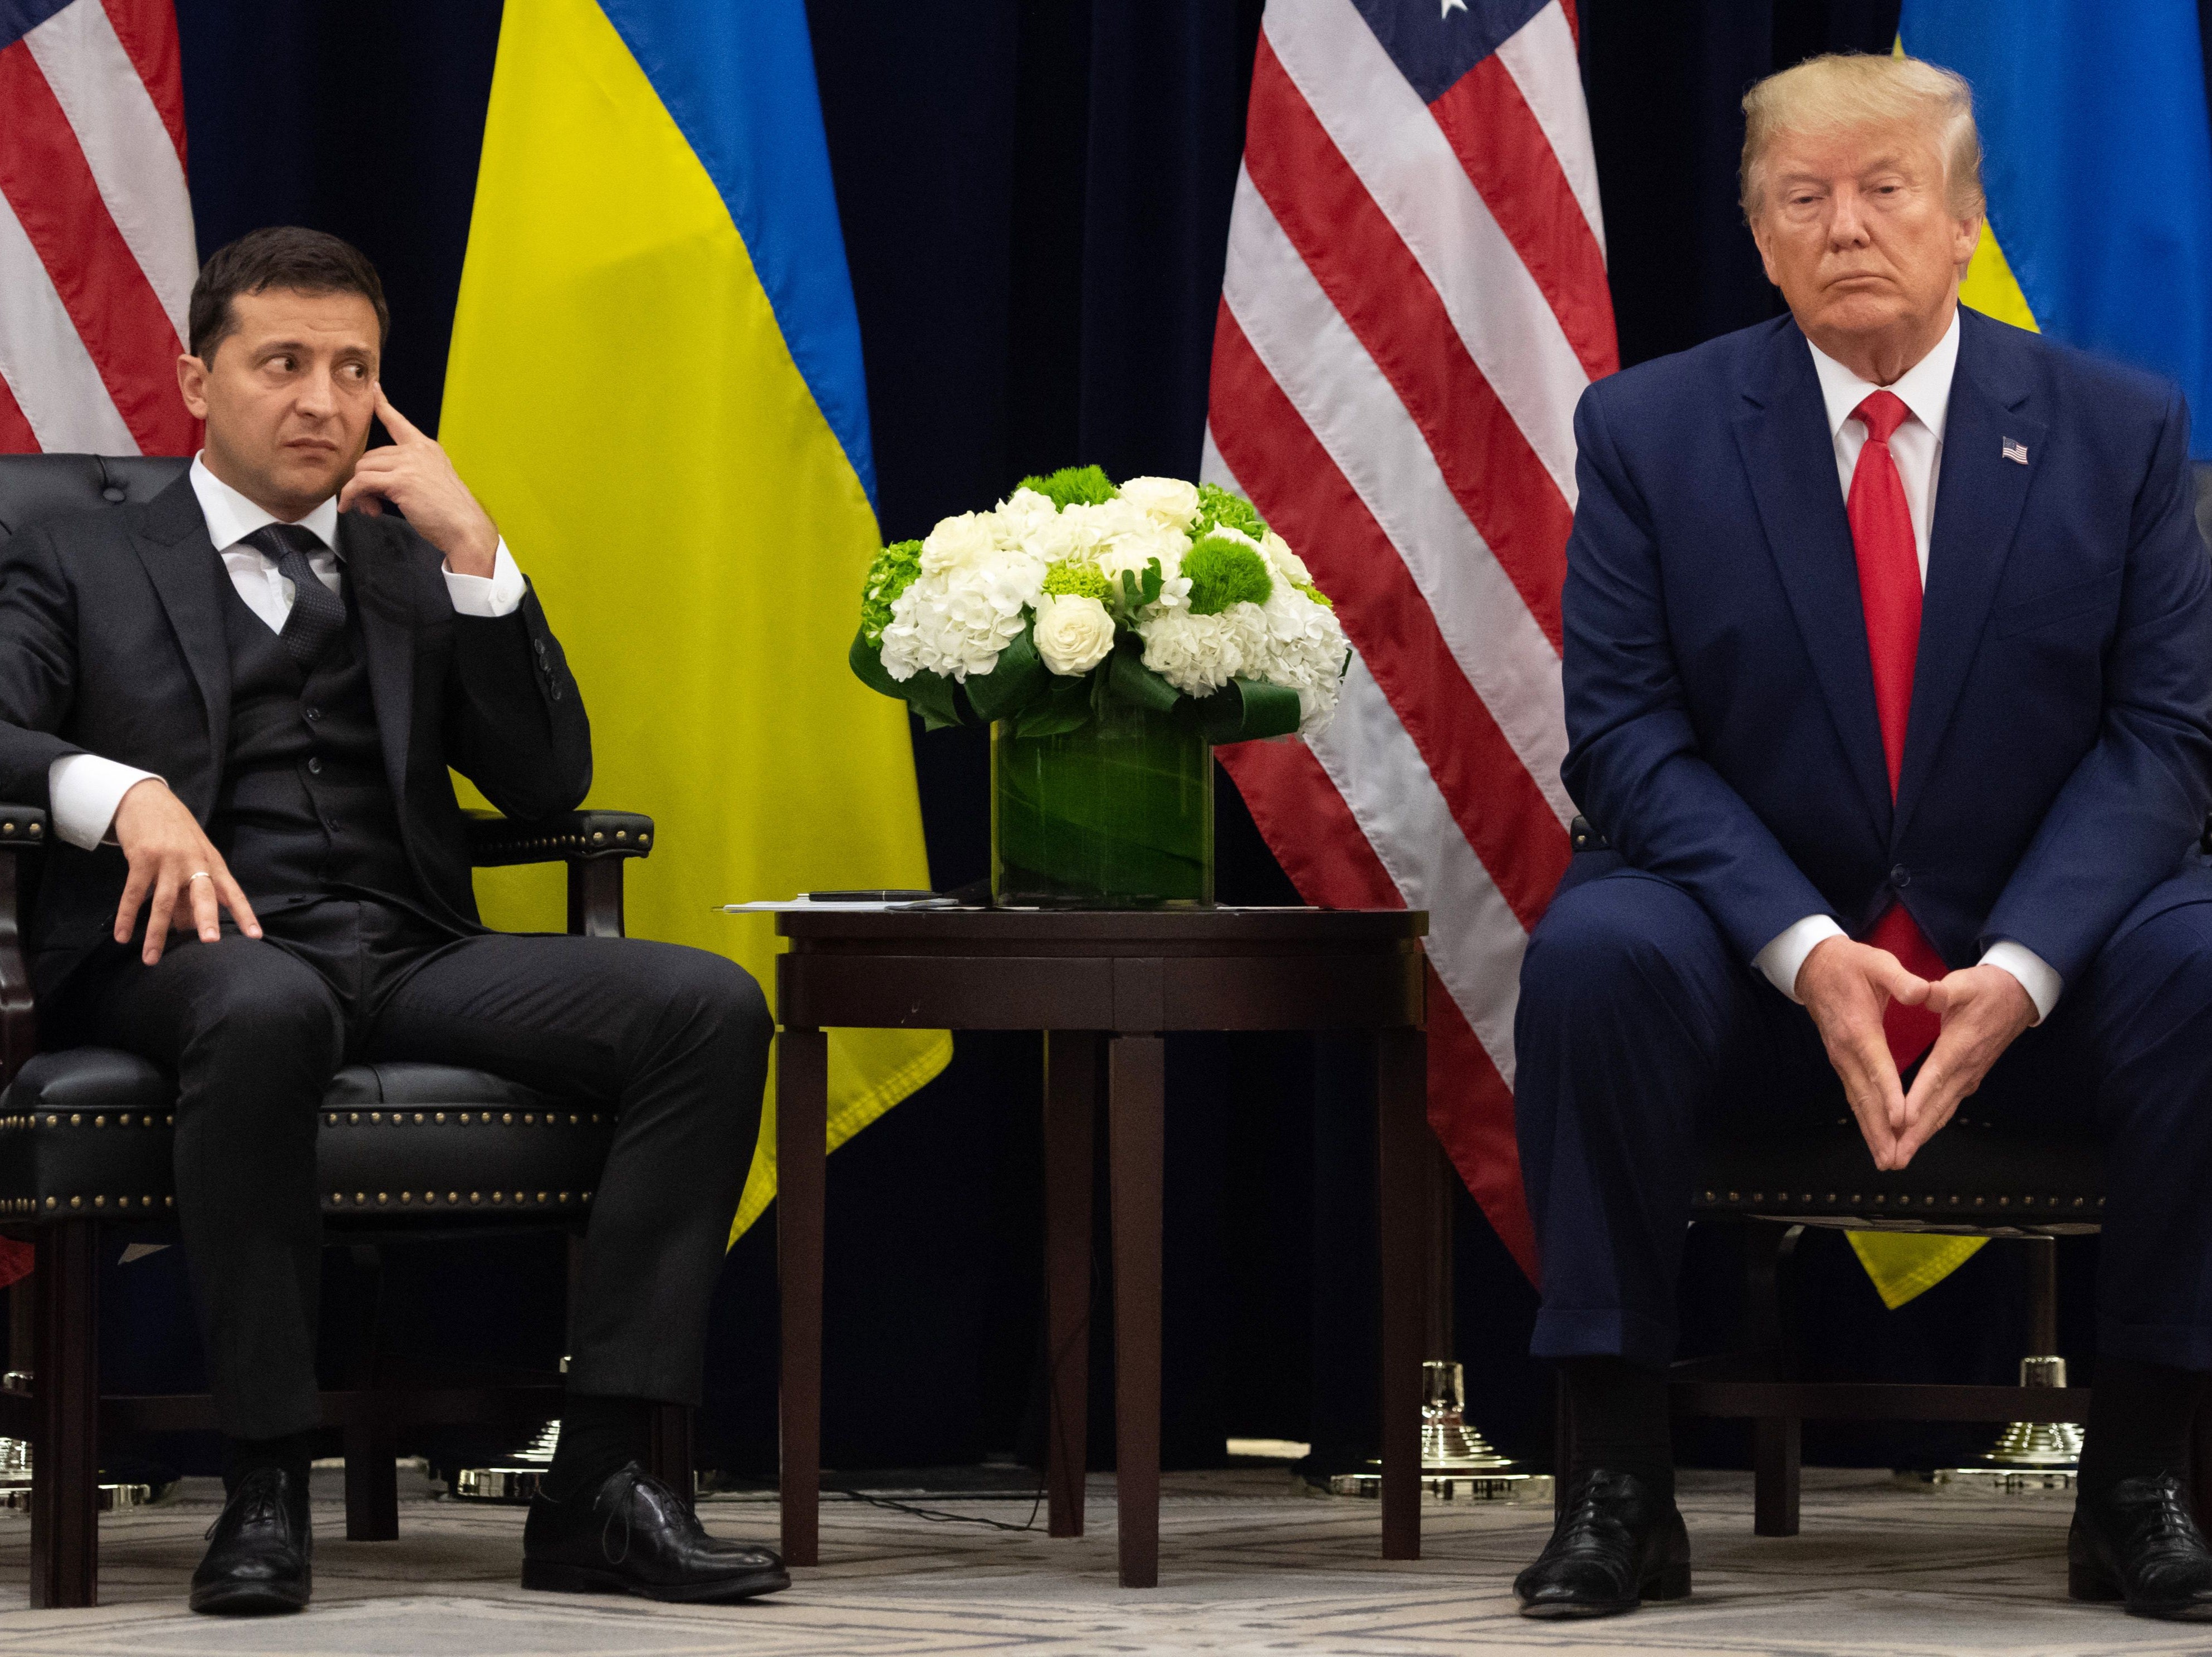 US President Donald Trump and Ukrainian President Volodymyr Zelensky looks on during a meeting in New York